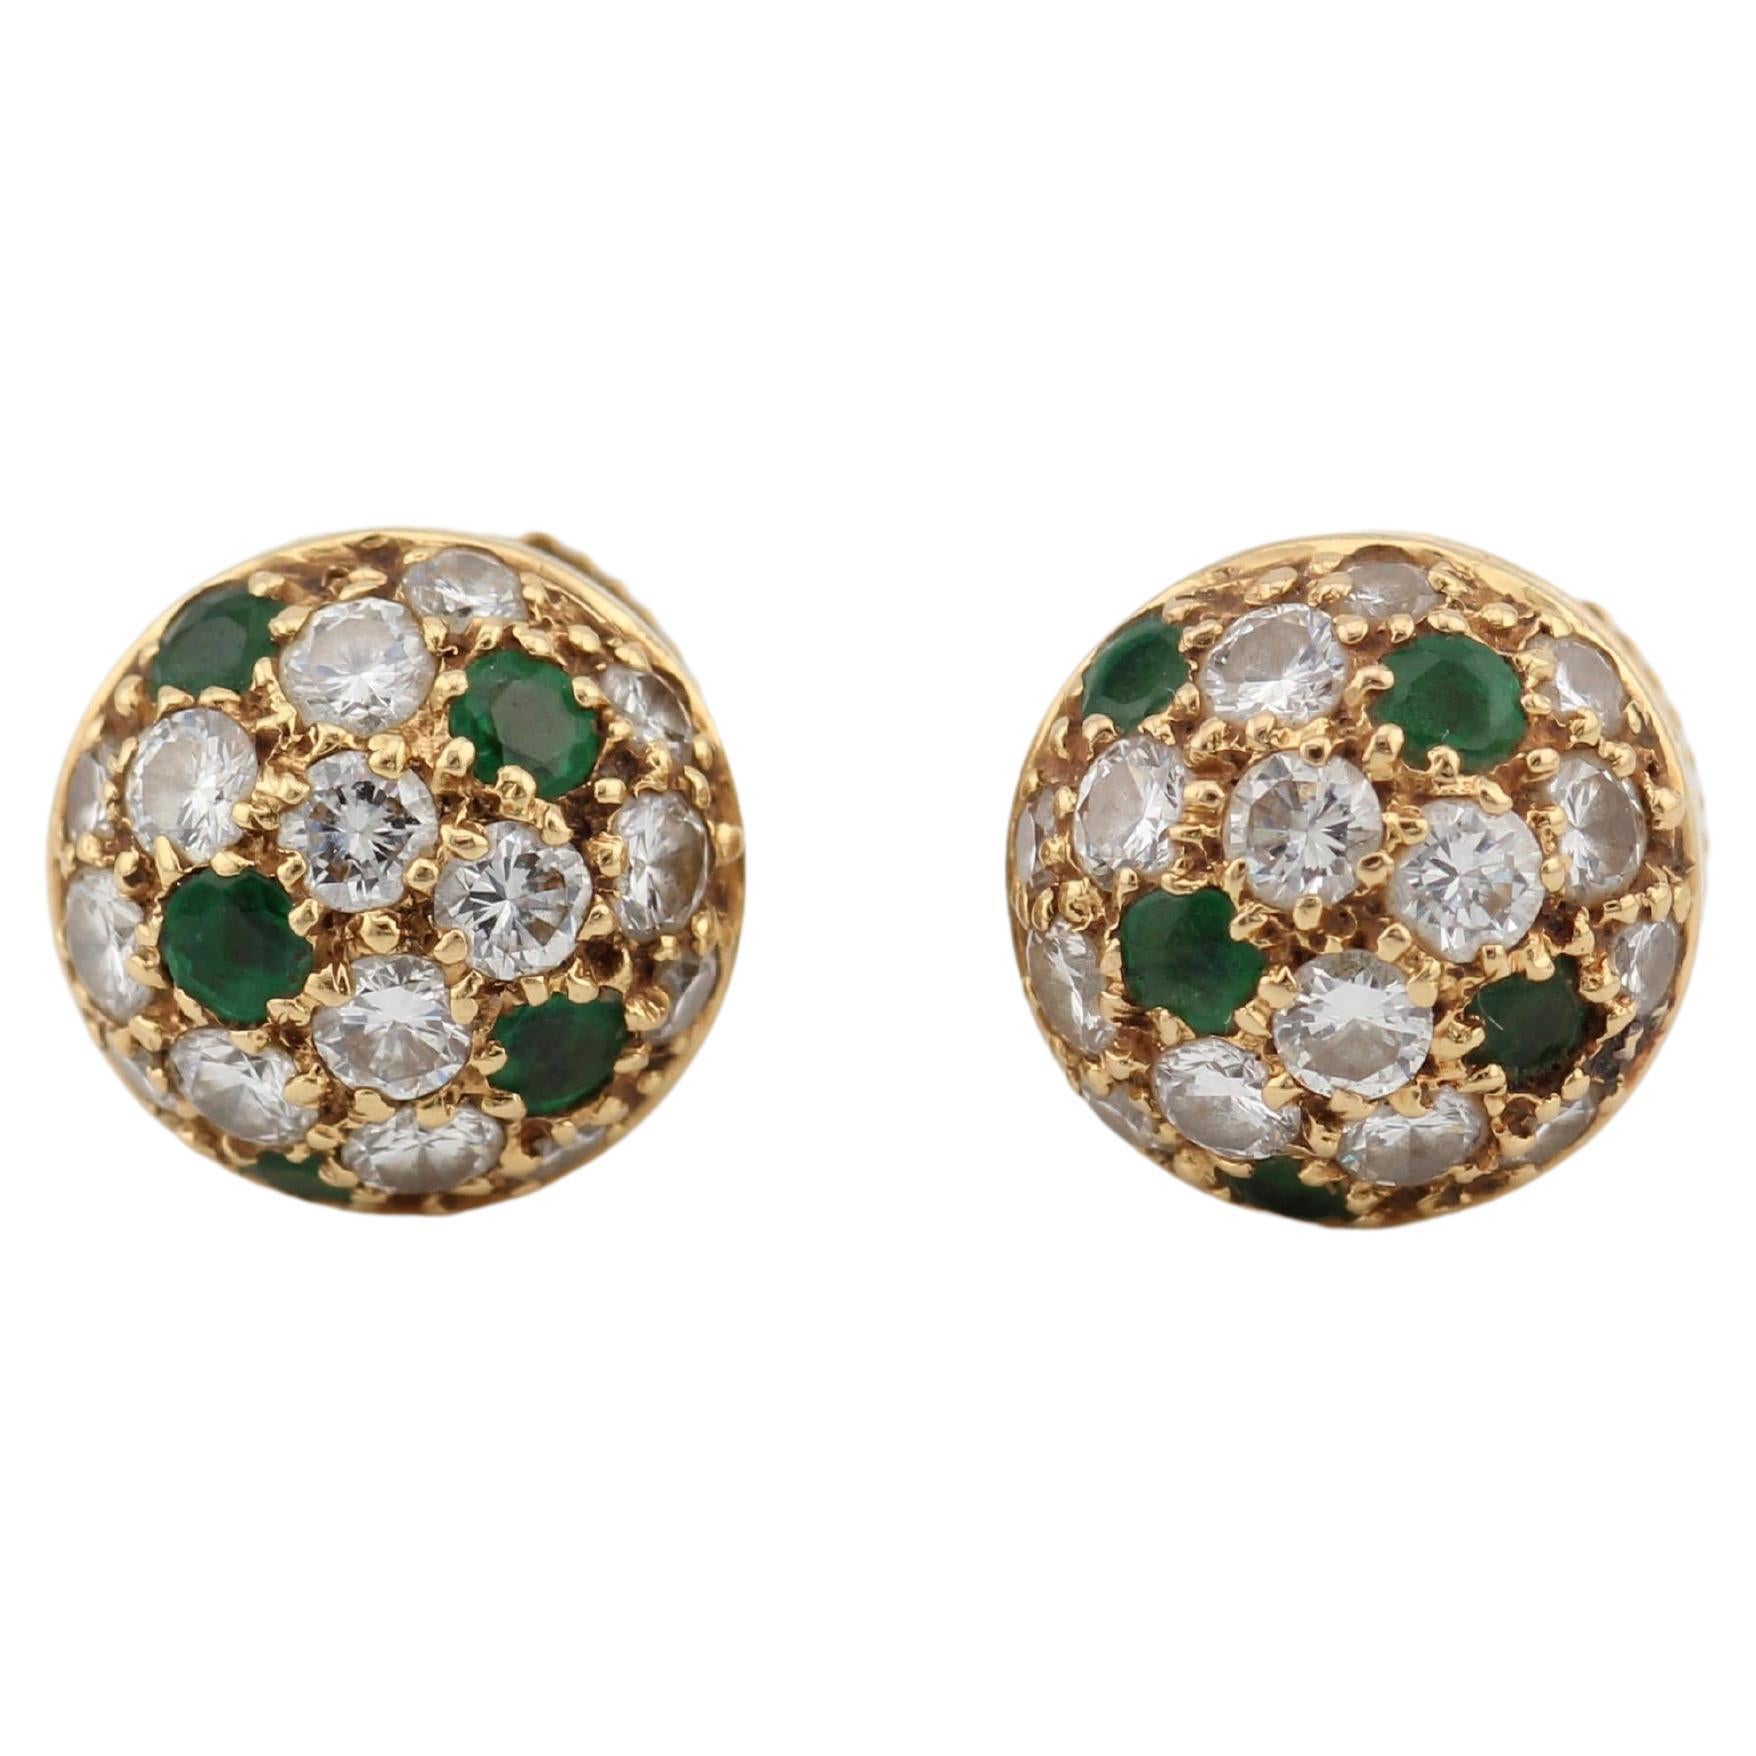 Cartier Emerald and  Diamond 18K Gold Petite Dome Earrings